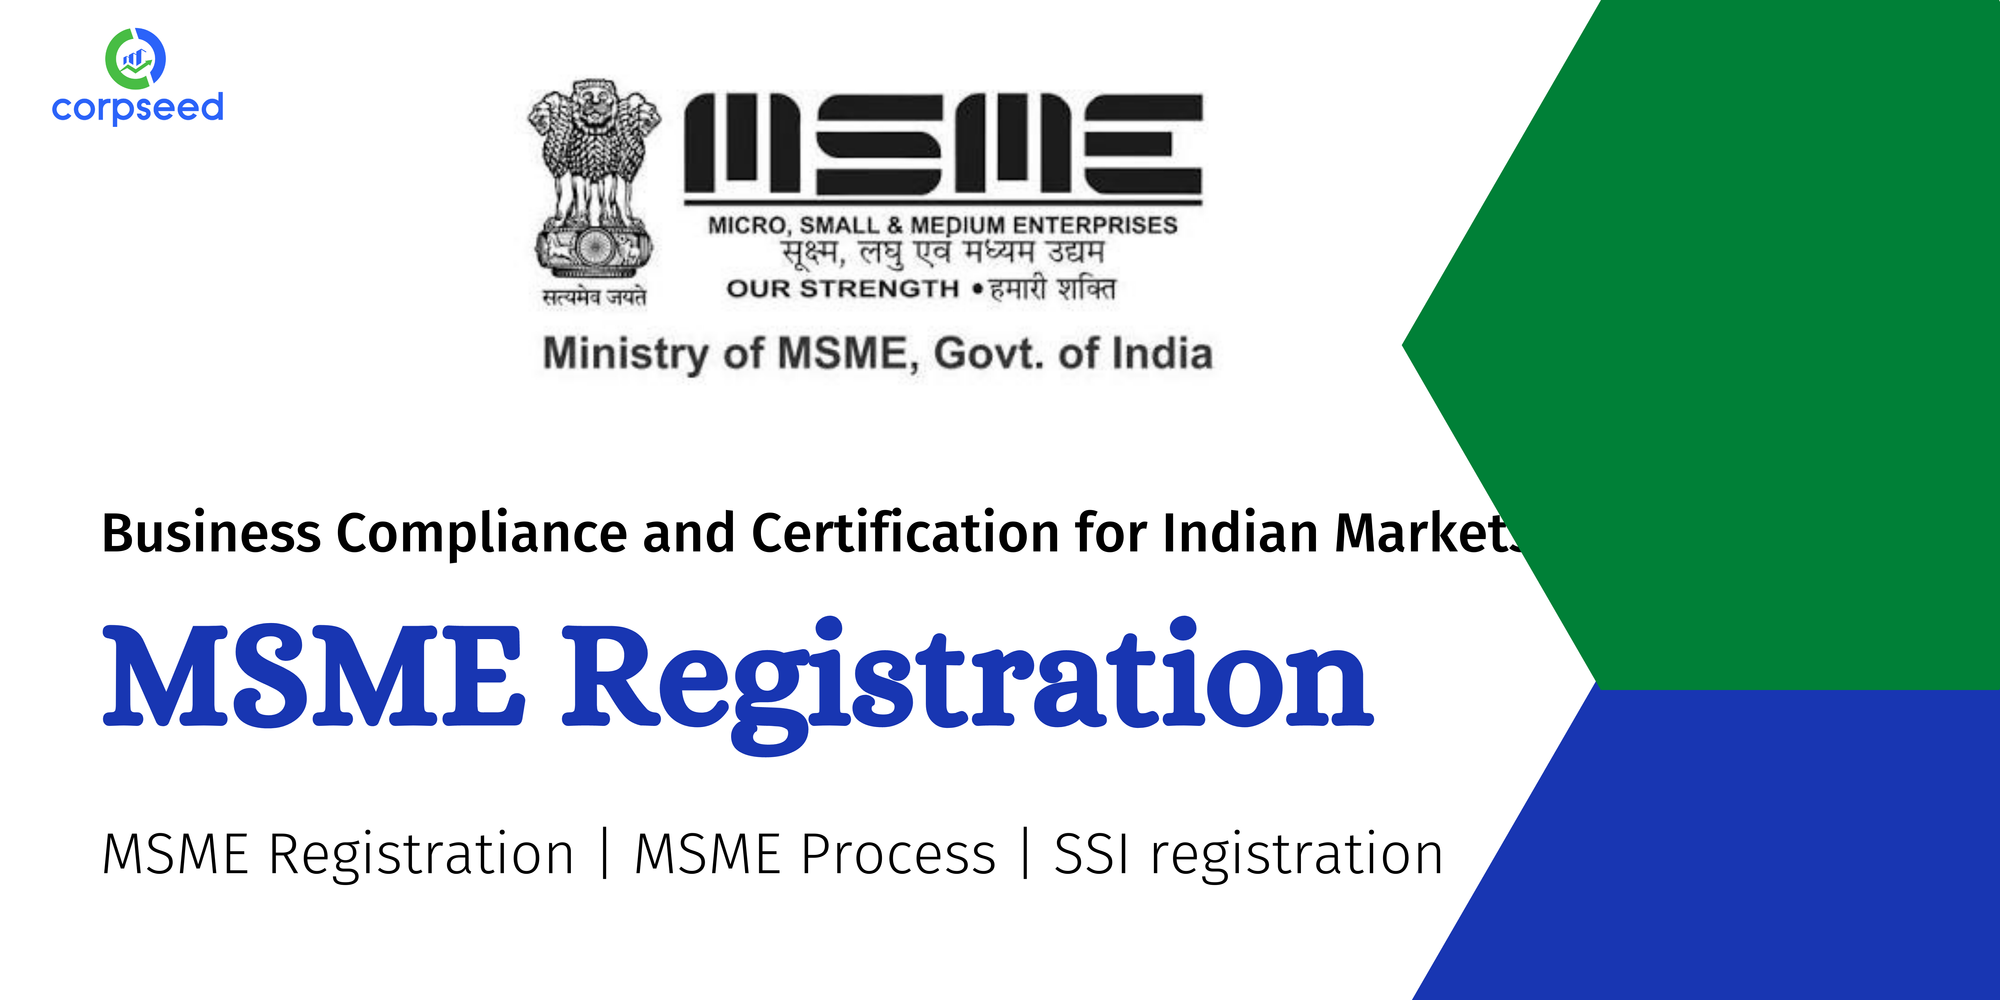 How to Get MSME Registration and Documents Required?